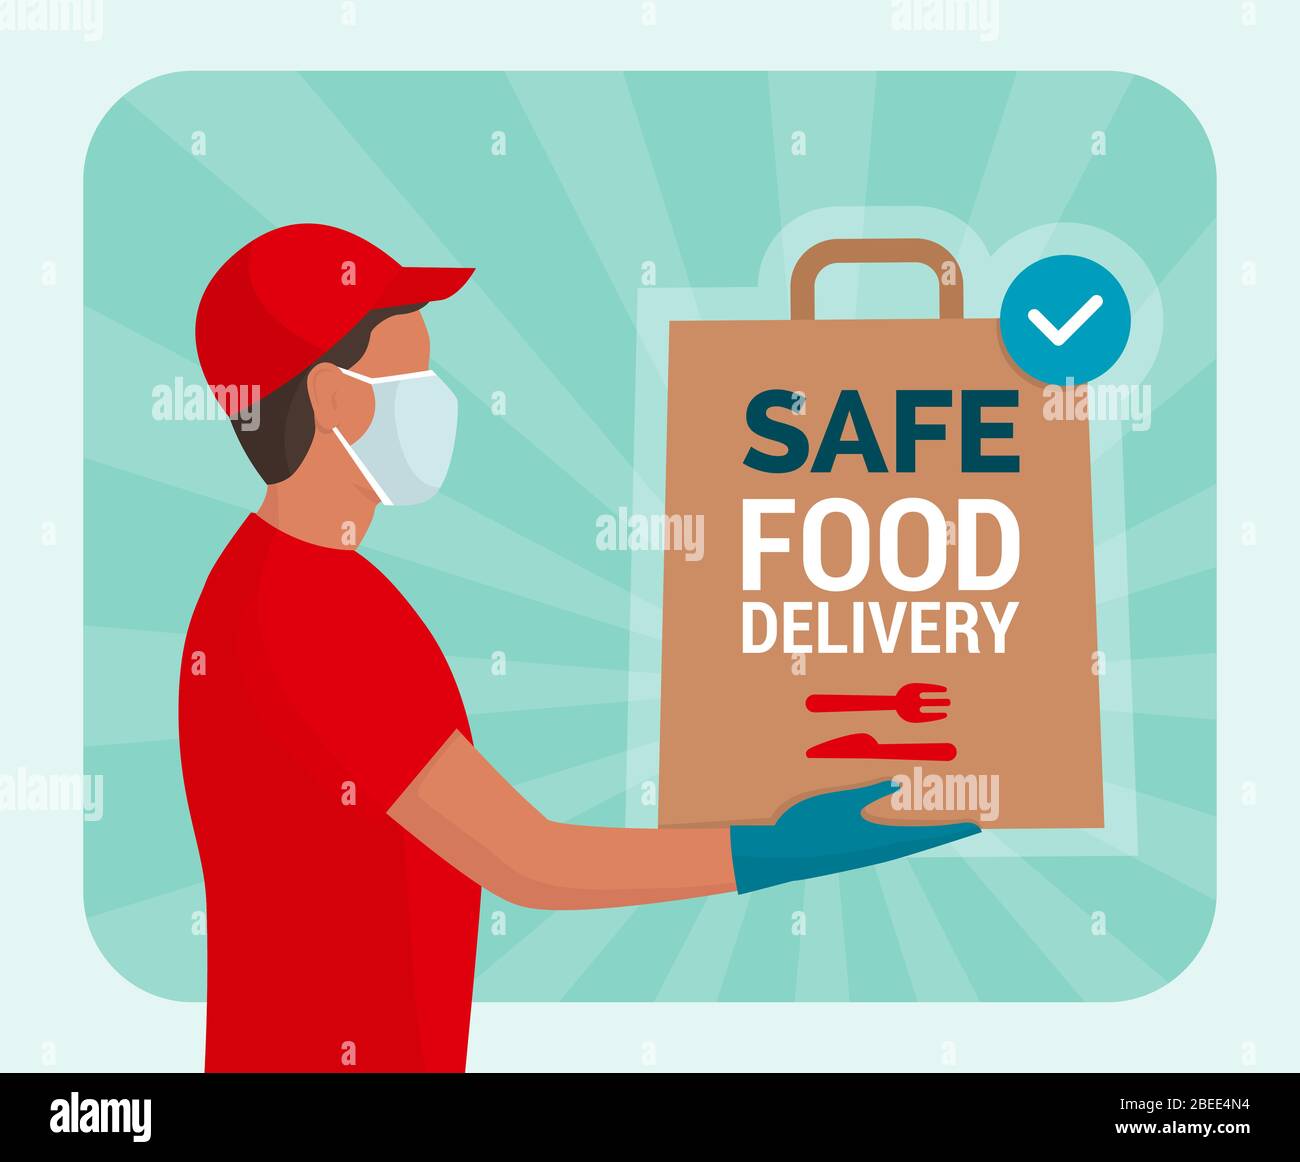 Safe food delivery at home during coronavirus covid-19 epidemic: delivery man holding a bag with fast food, he is wearing a face mask and gloves Stock Vector